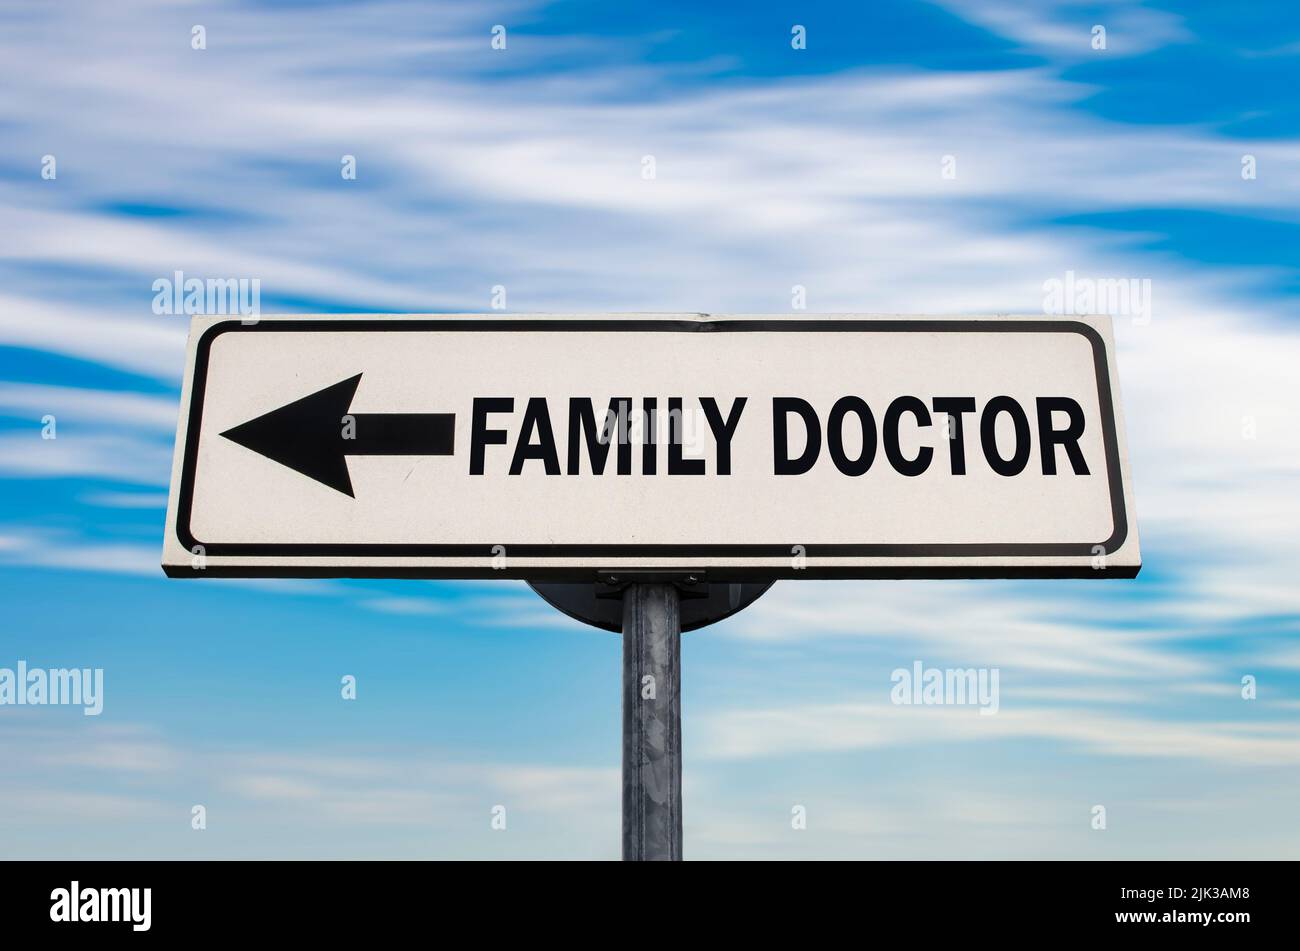 Family doctor arrow road sign. Free medicine concept. Stock Photo